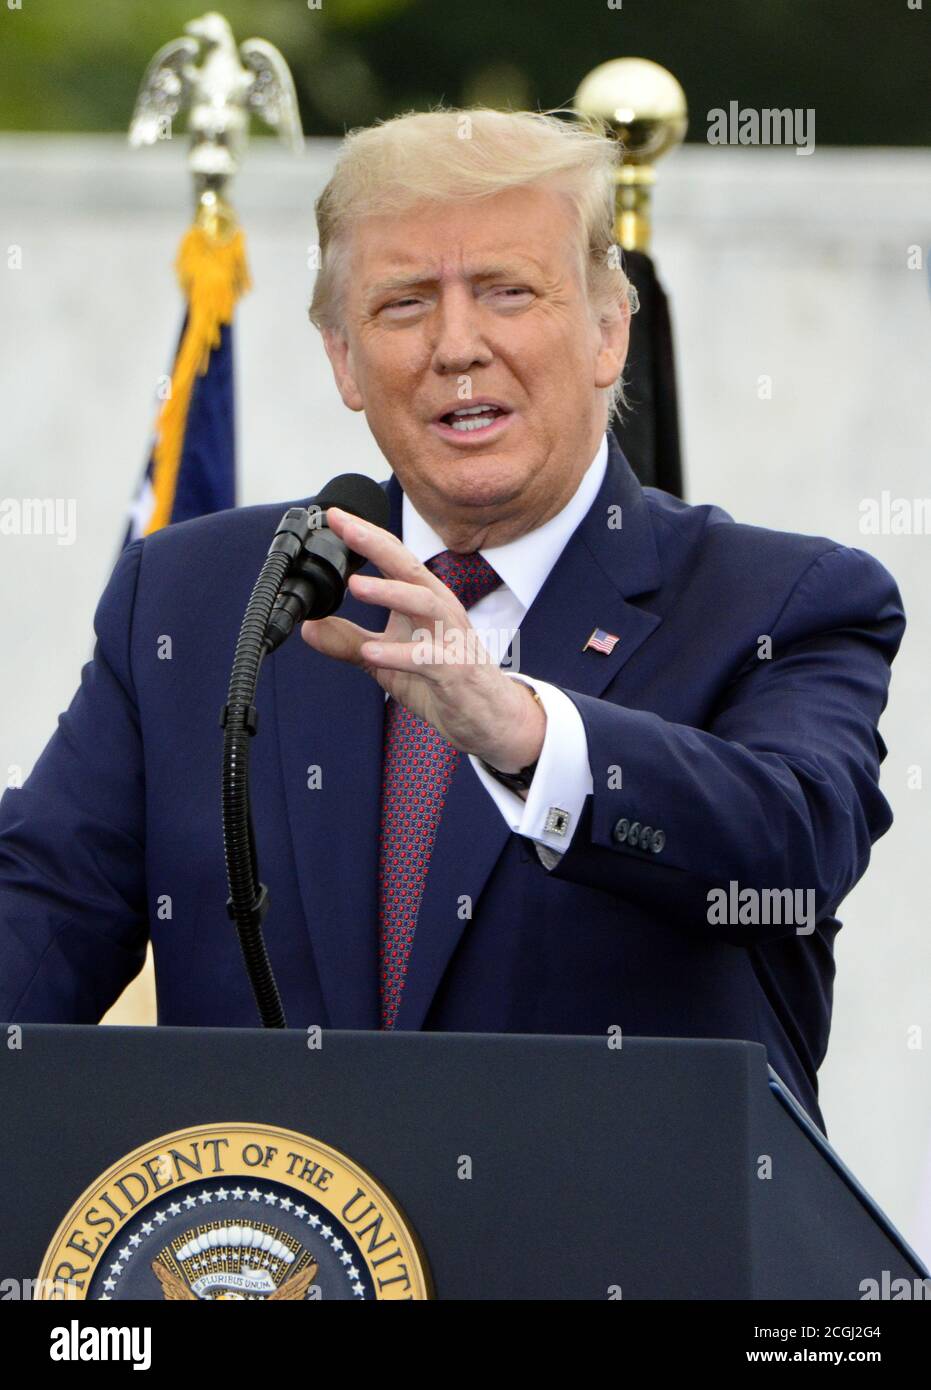 Shanksville, United States. 11th Sep, 2020. President Donald Trump delivers remarks at the Flight 93 National Memorial on the 19th observance of the 911 terrorist attack on America on Friday, September 11, 2020 near Shanksville, Pennsylvania. The memorial honors the 40 passengers and crew that lost their lives in the crash. Photo by Archie Carpenter/UPI Credit: UPI/Alamy Live News Stock Photo